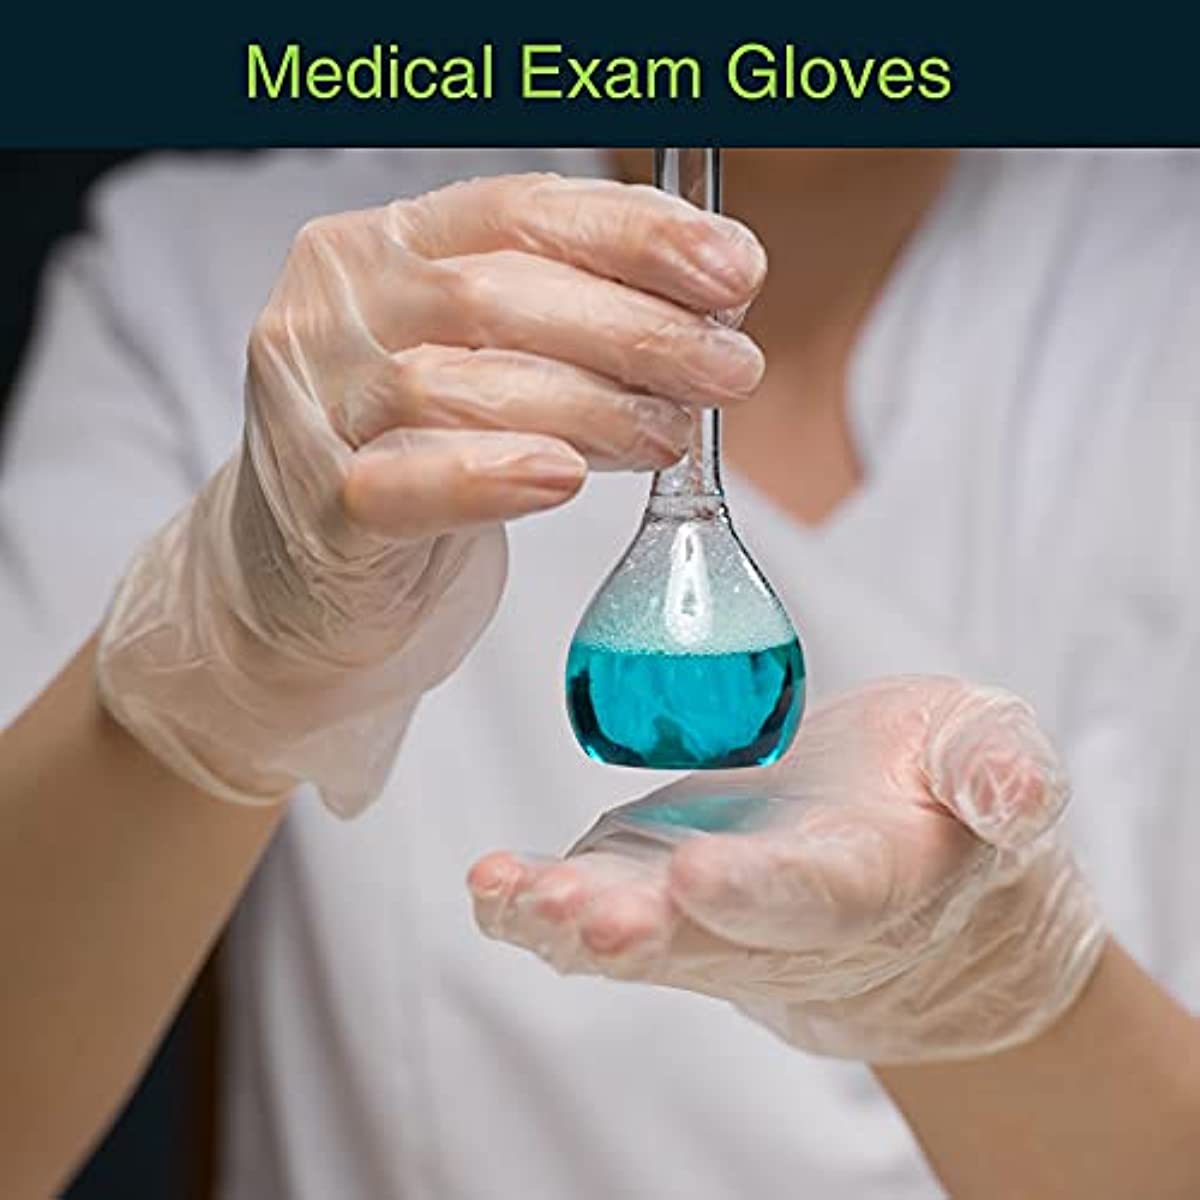 Clear Vinyl Disposable Gloves X Large 100 Pack - Latex Free, Powder Free Medical Exam Gloves - Surgical, Home, Cleaning, and Food Gloves - 3 Mil Thickness